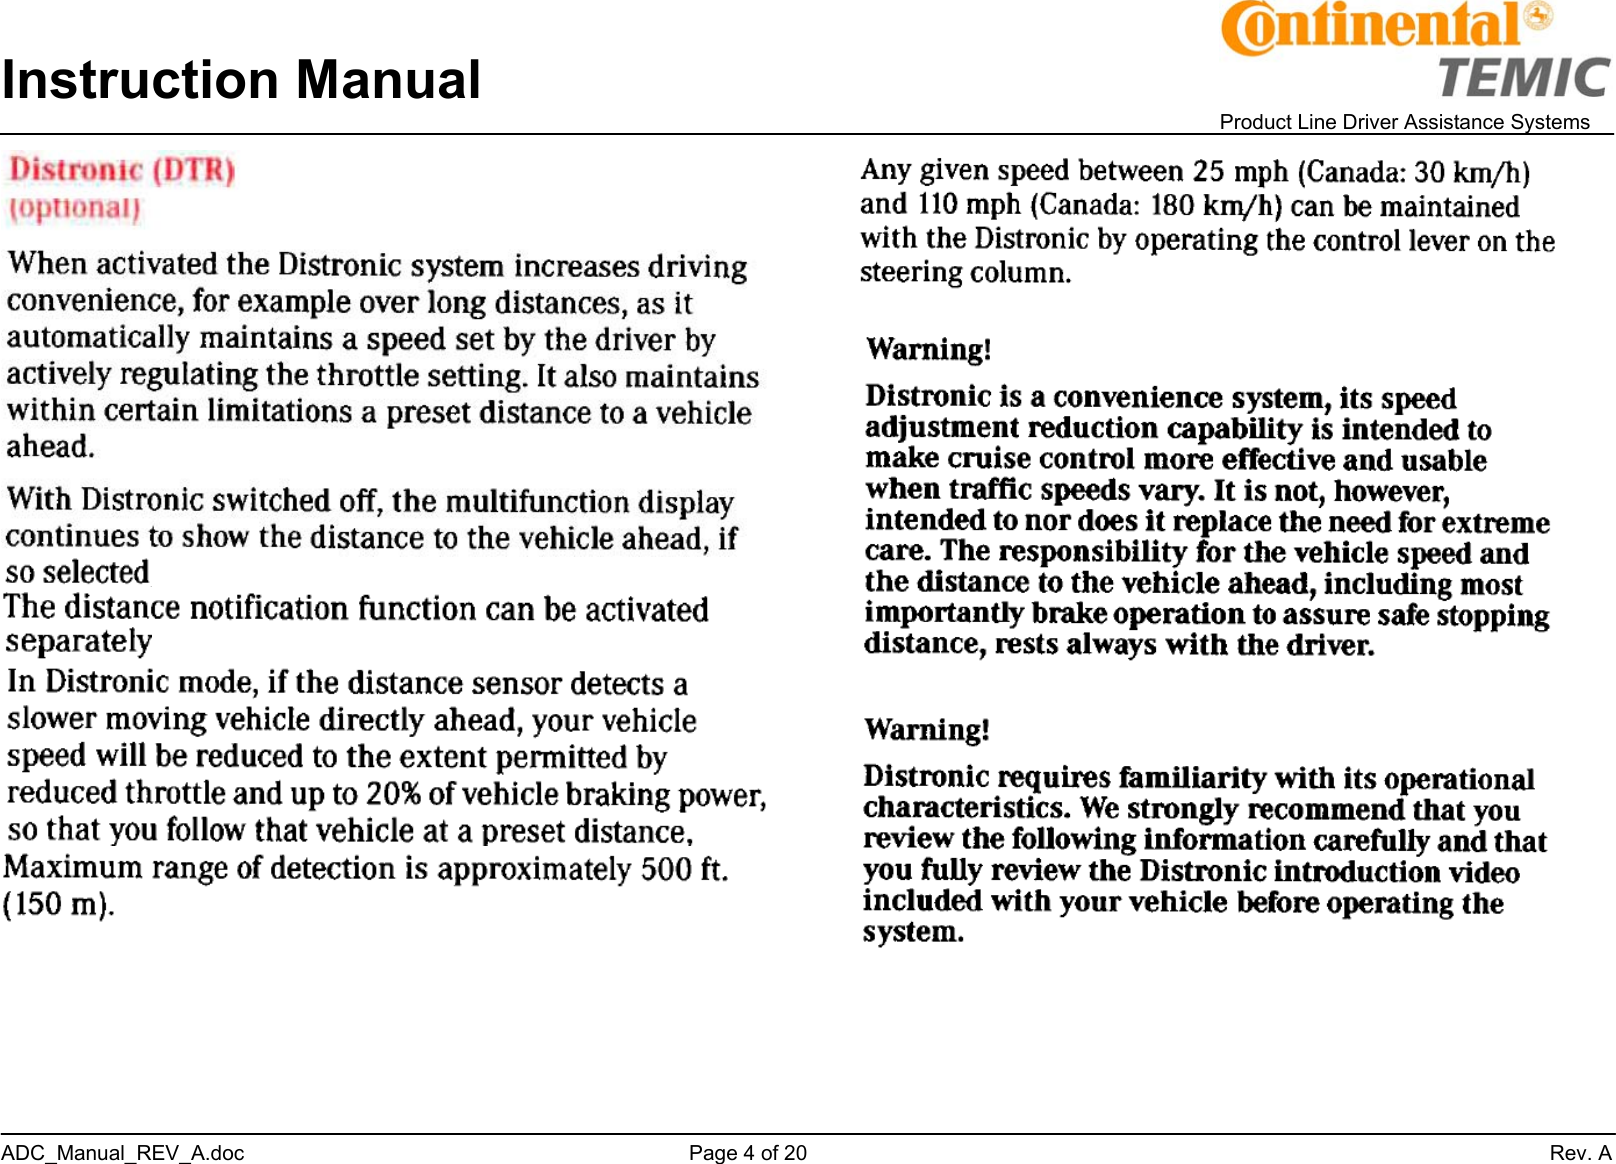 Instruction Manual    Product Line Driver Assistance Systems ADC_Manual_REV_A.doc     Page 4 of 20                 Rev. A         